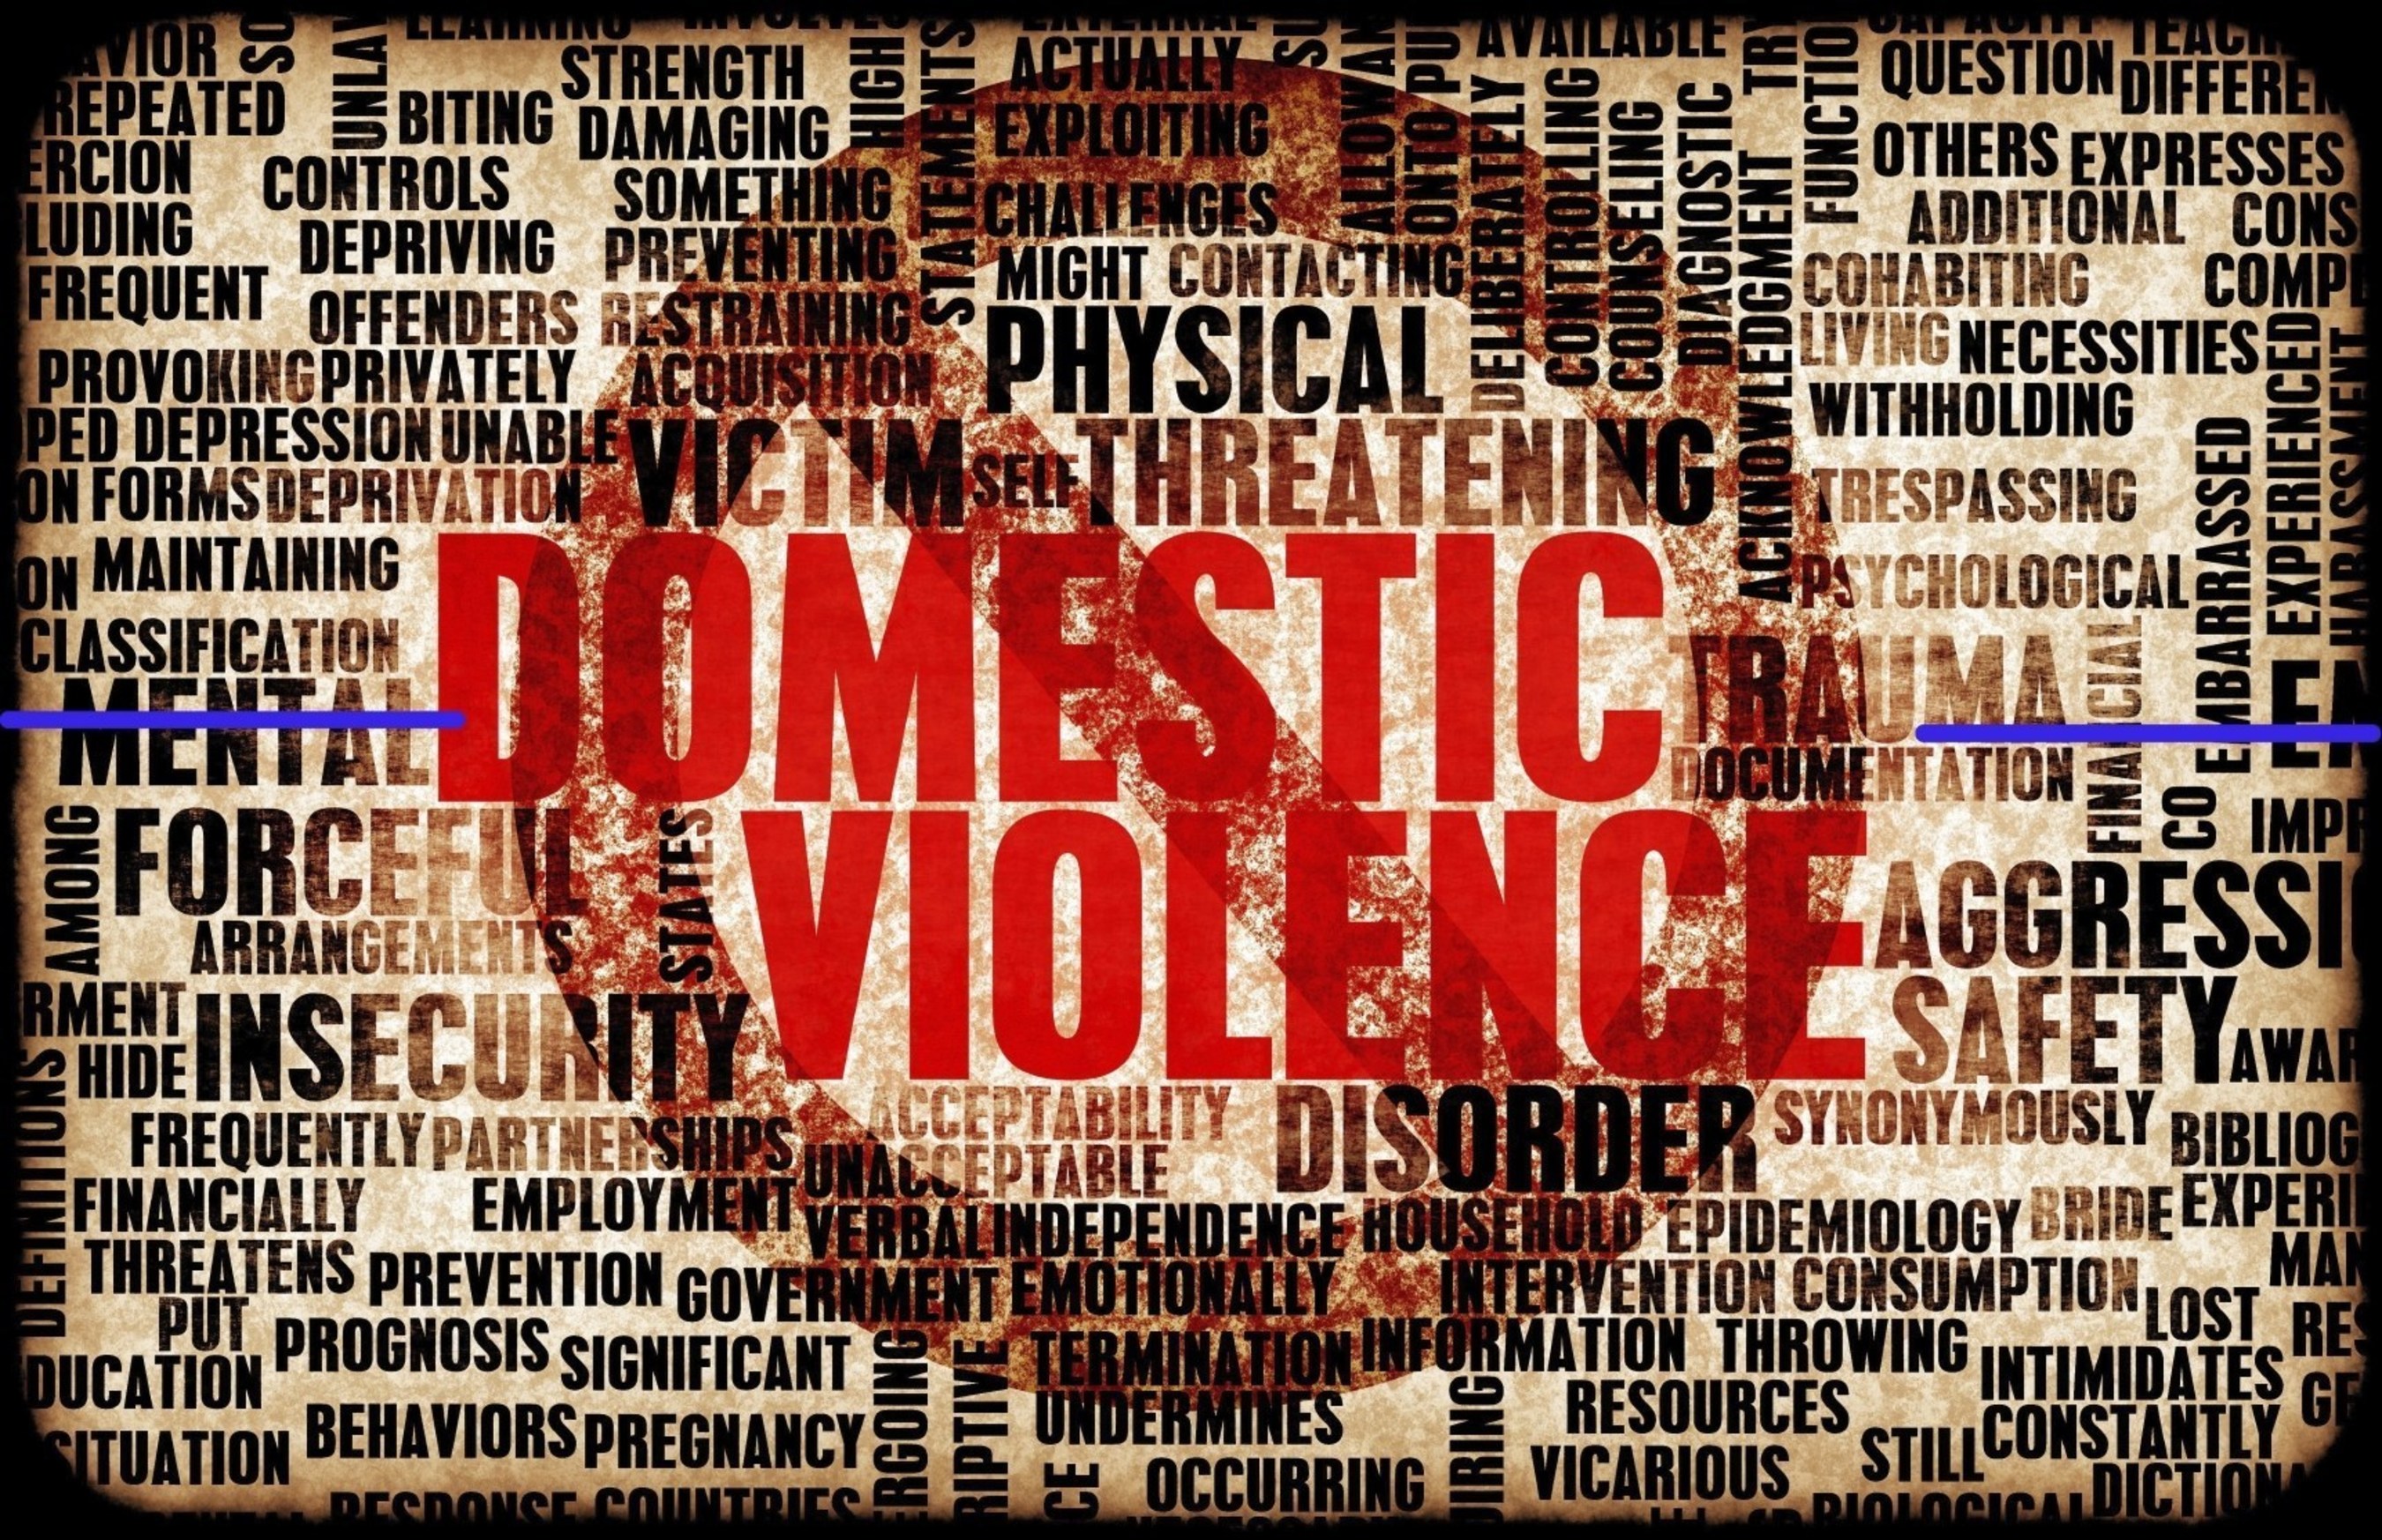 SIX FINANCIAL STRATEGIES FOR VICTIMS ESCAPING DOMESTIC VIOLENCE